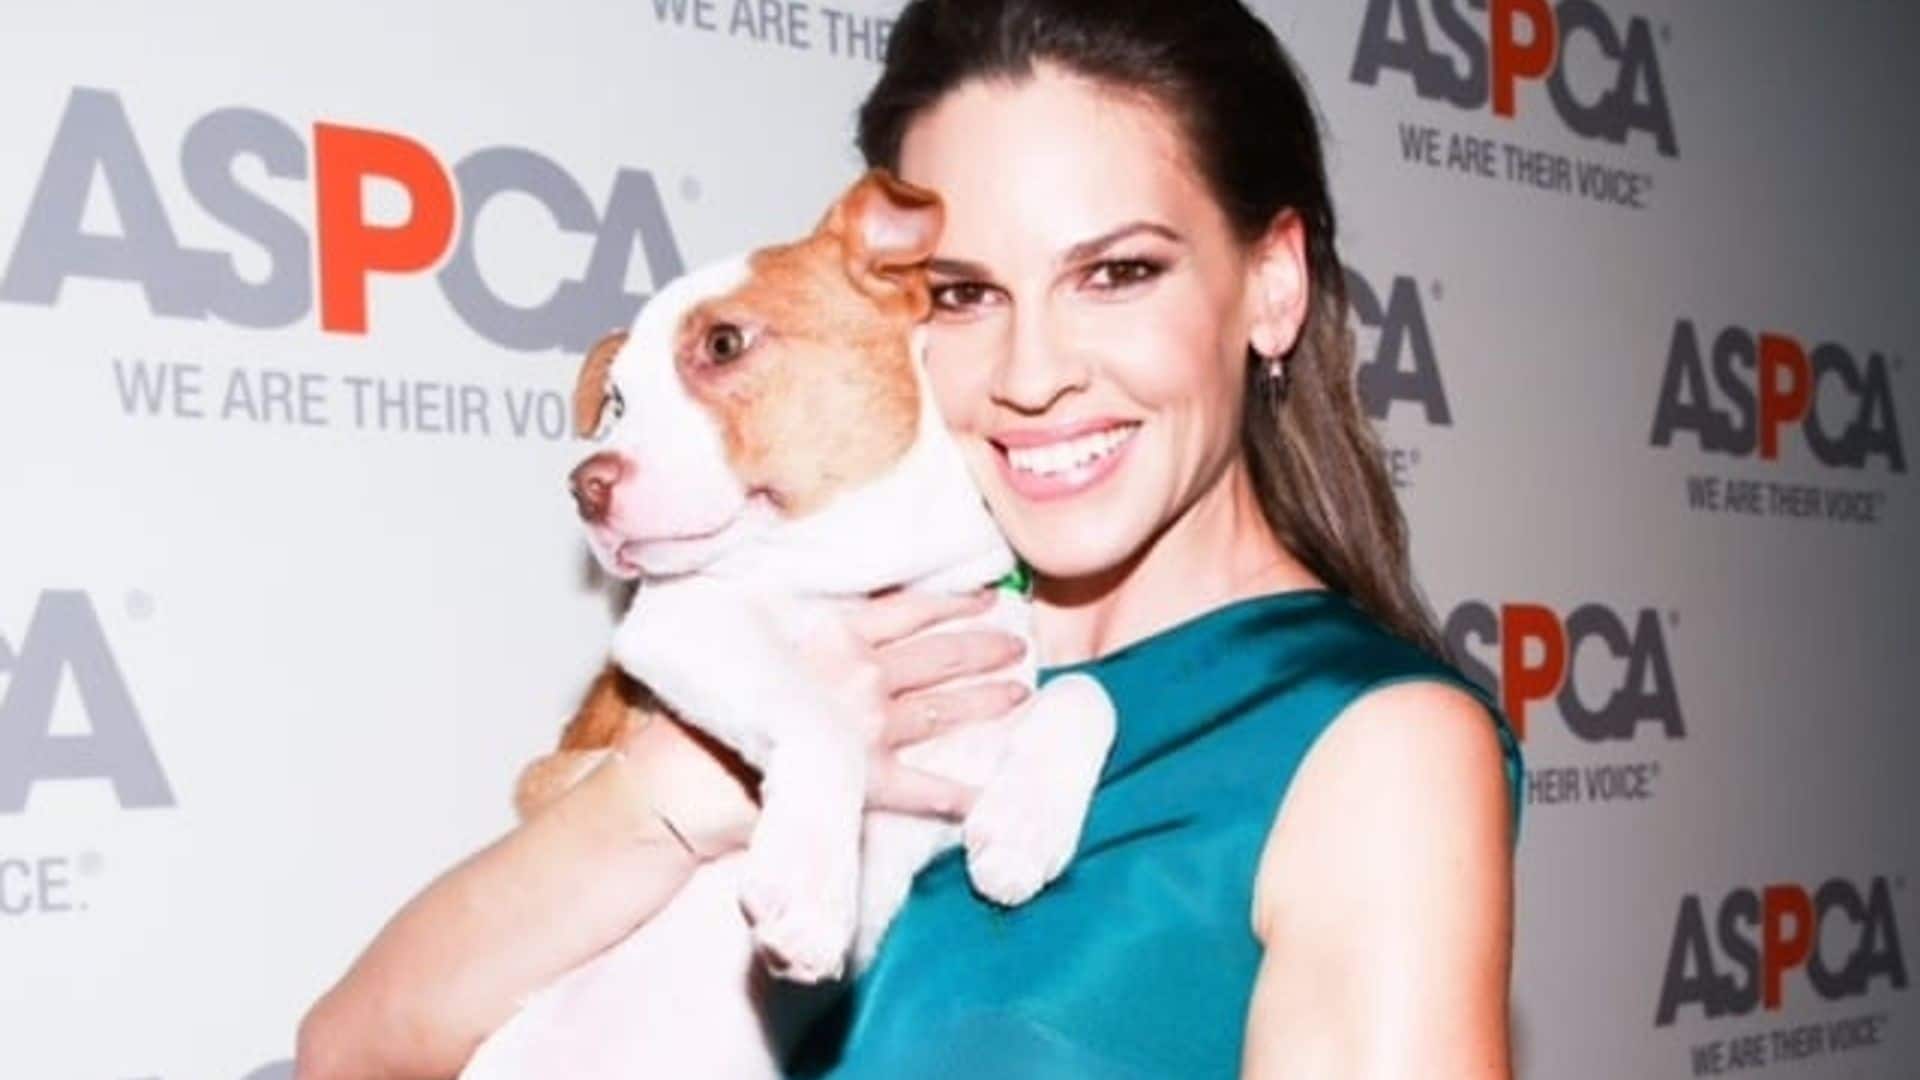 April 9: Hilary Swank held an adorable pup at ASPCA'S 18th Annual Bergh Ball in New York City.
Photo: WireImage